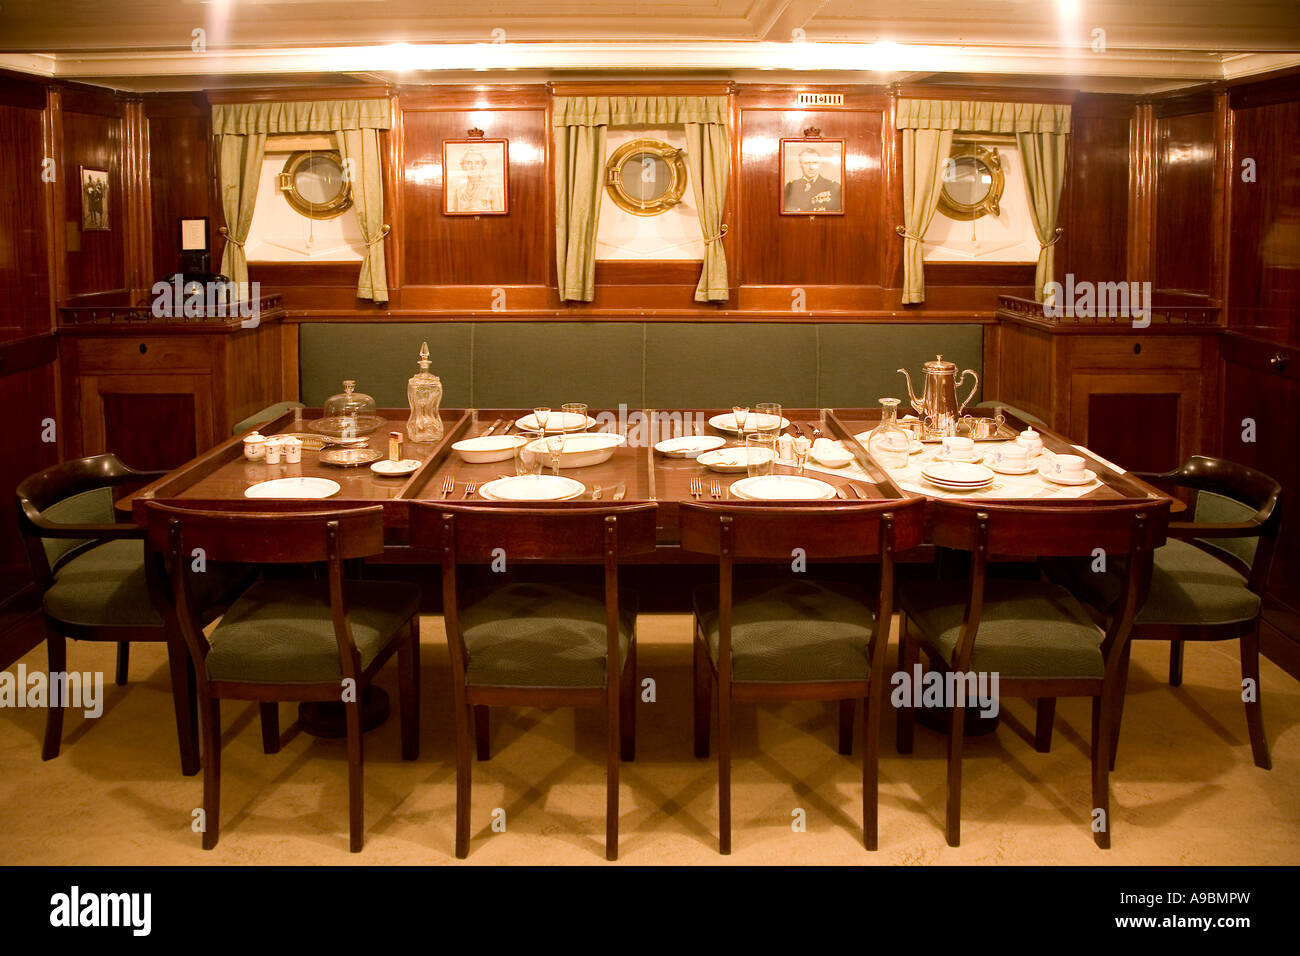 Old Ship Land In Dining Room